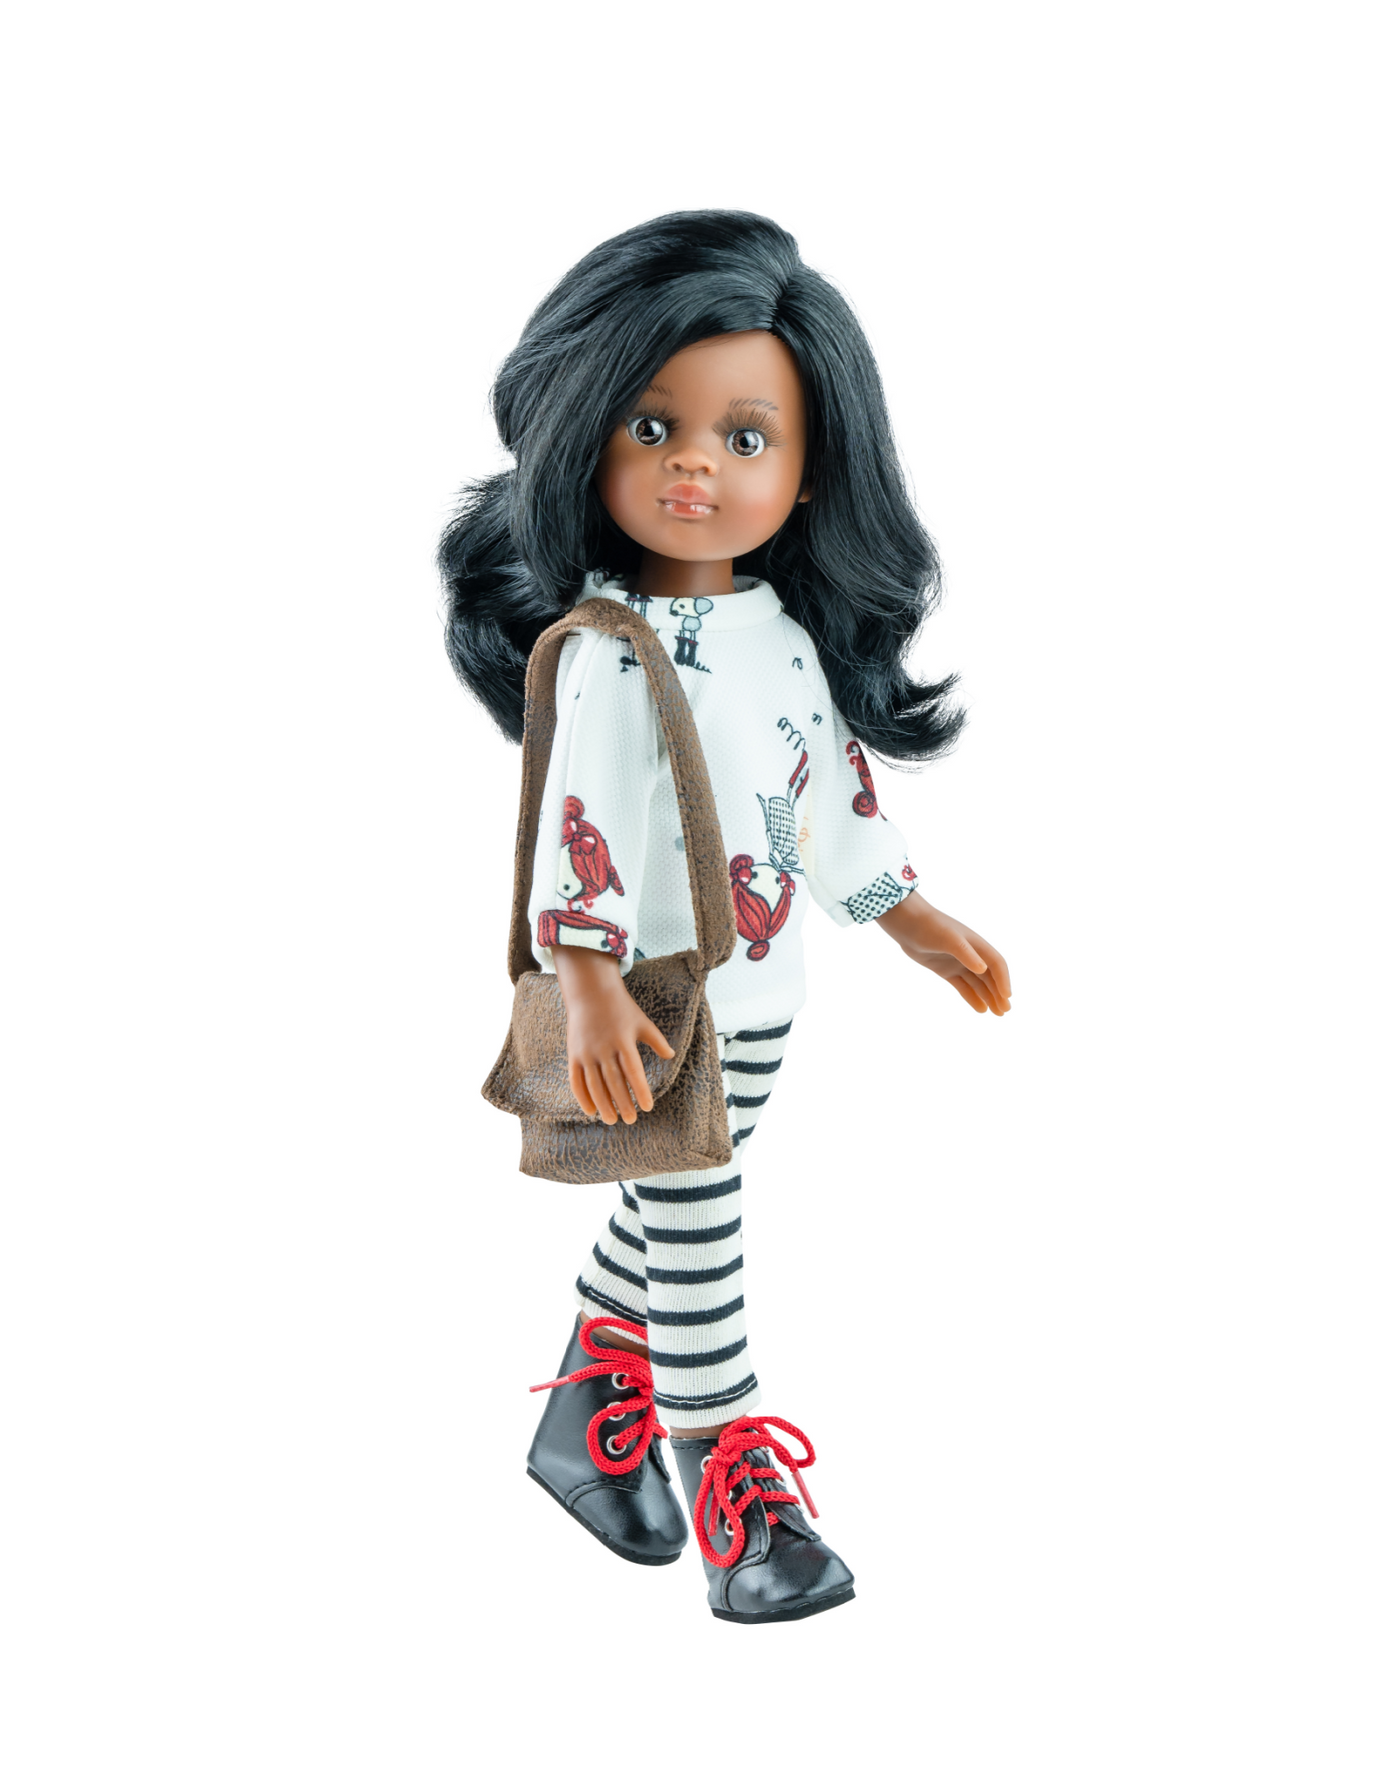 Las Amigas Doll - Nora long sleeves sweater and lined pants - Paola Reina